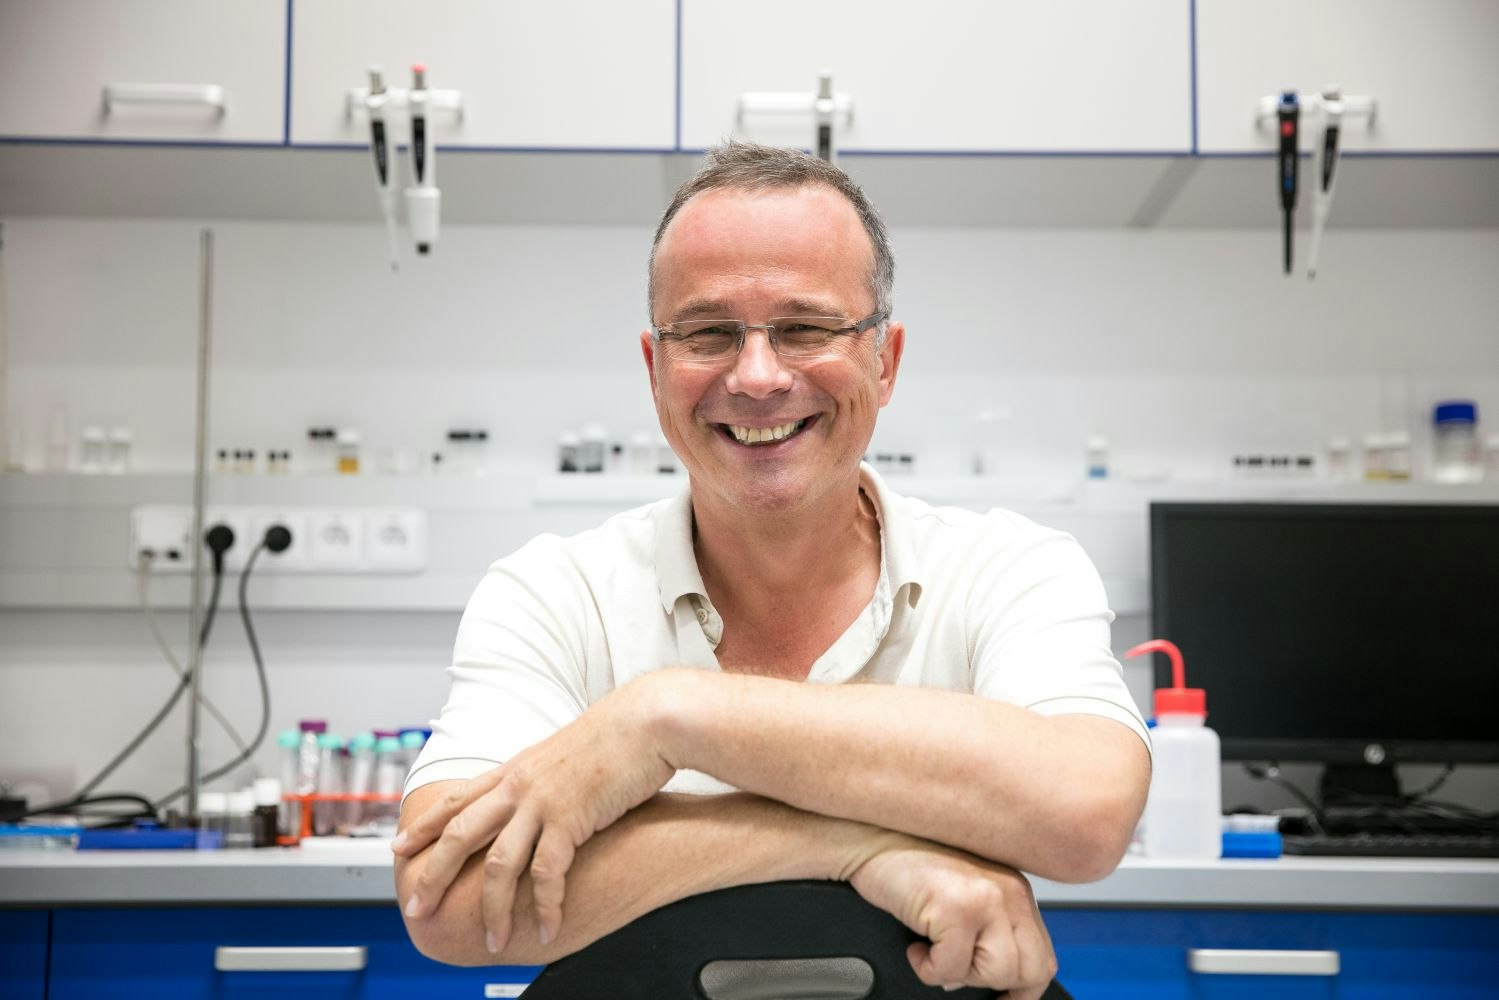 Dr Martin Pumera, who founded Advanced Functional Nanorobots